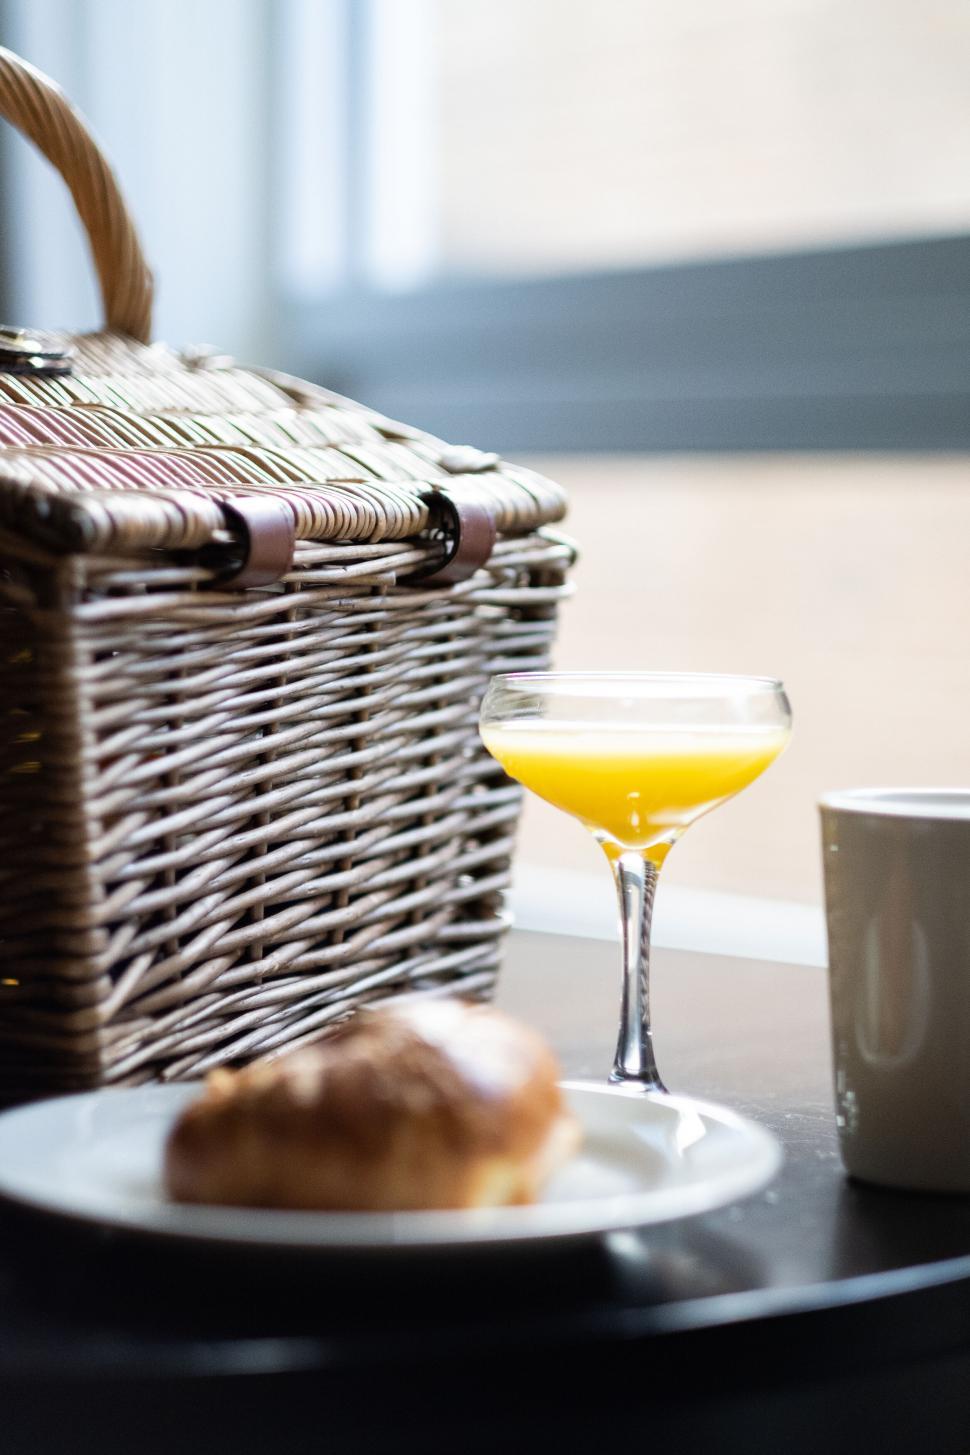 Free Image of Picnic basket, fresh juice, and bakery on a table 